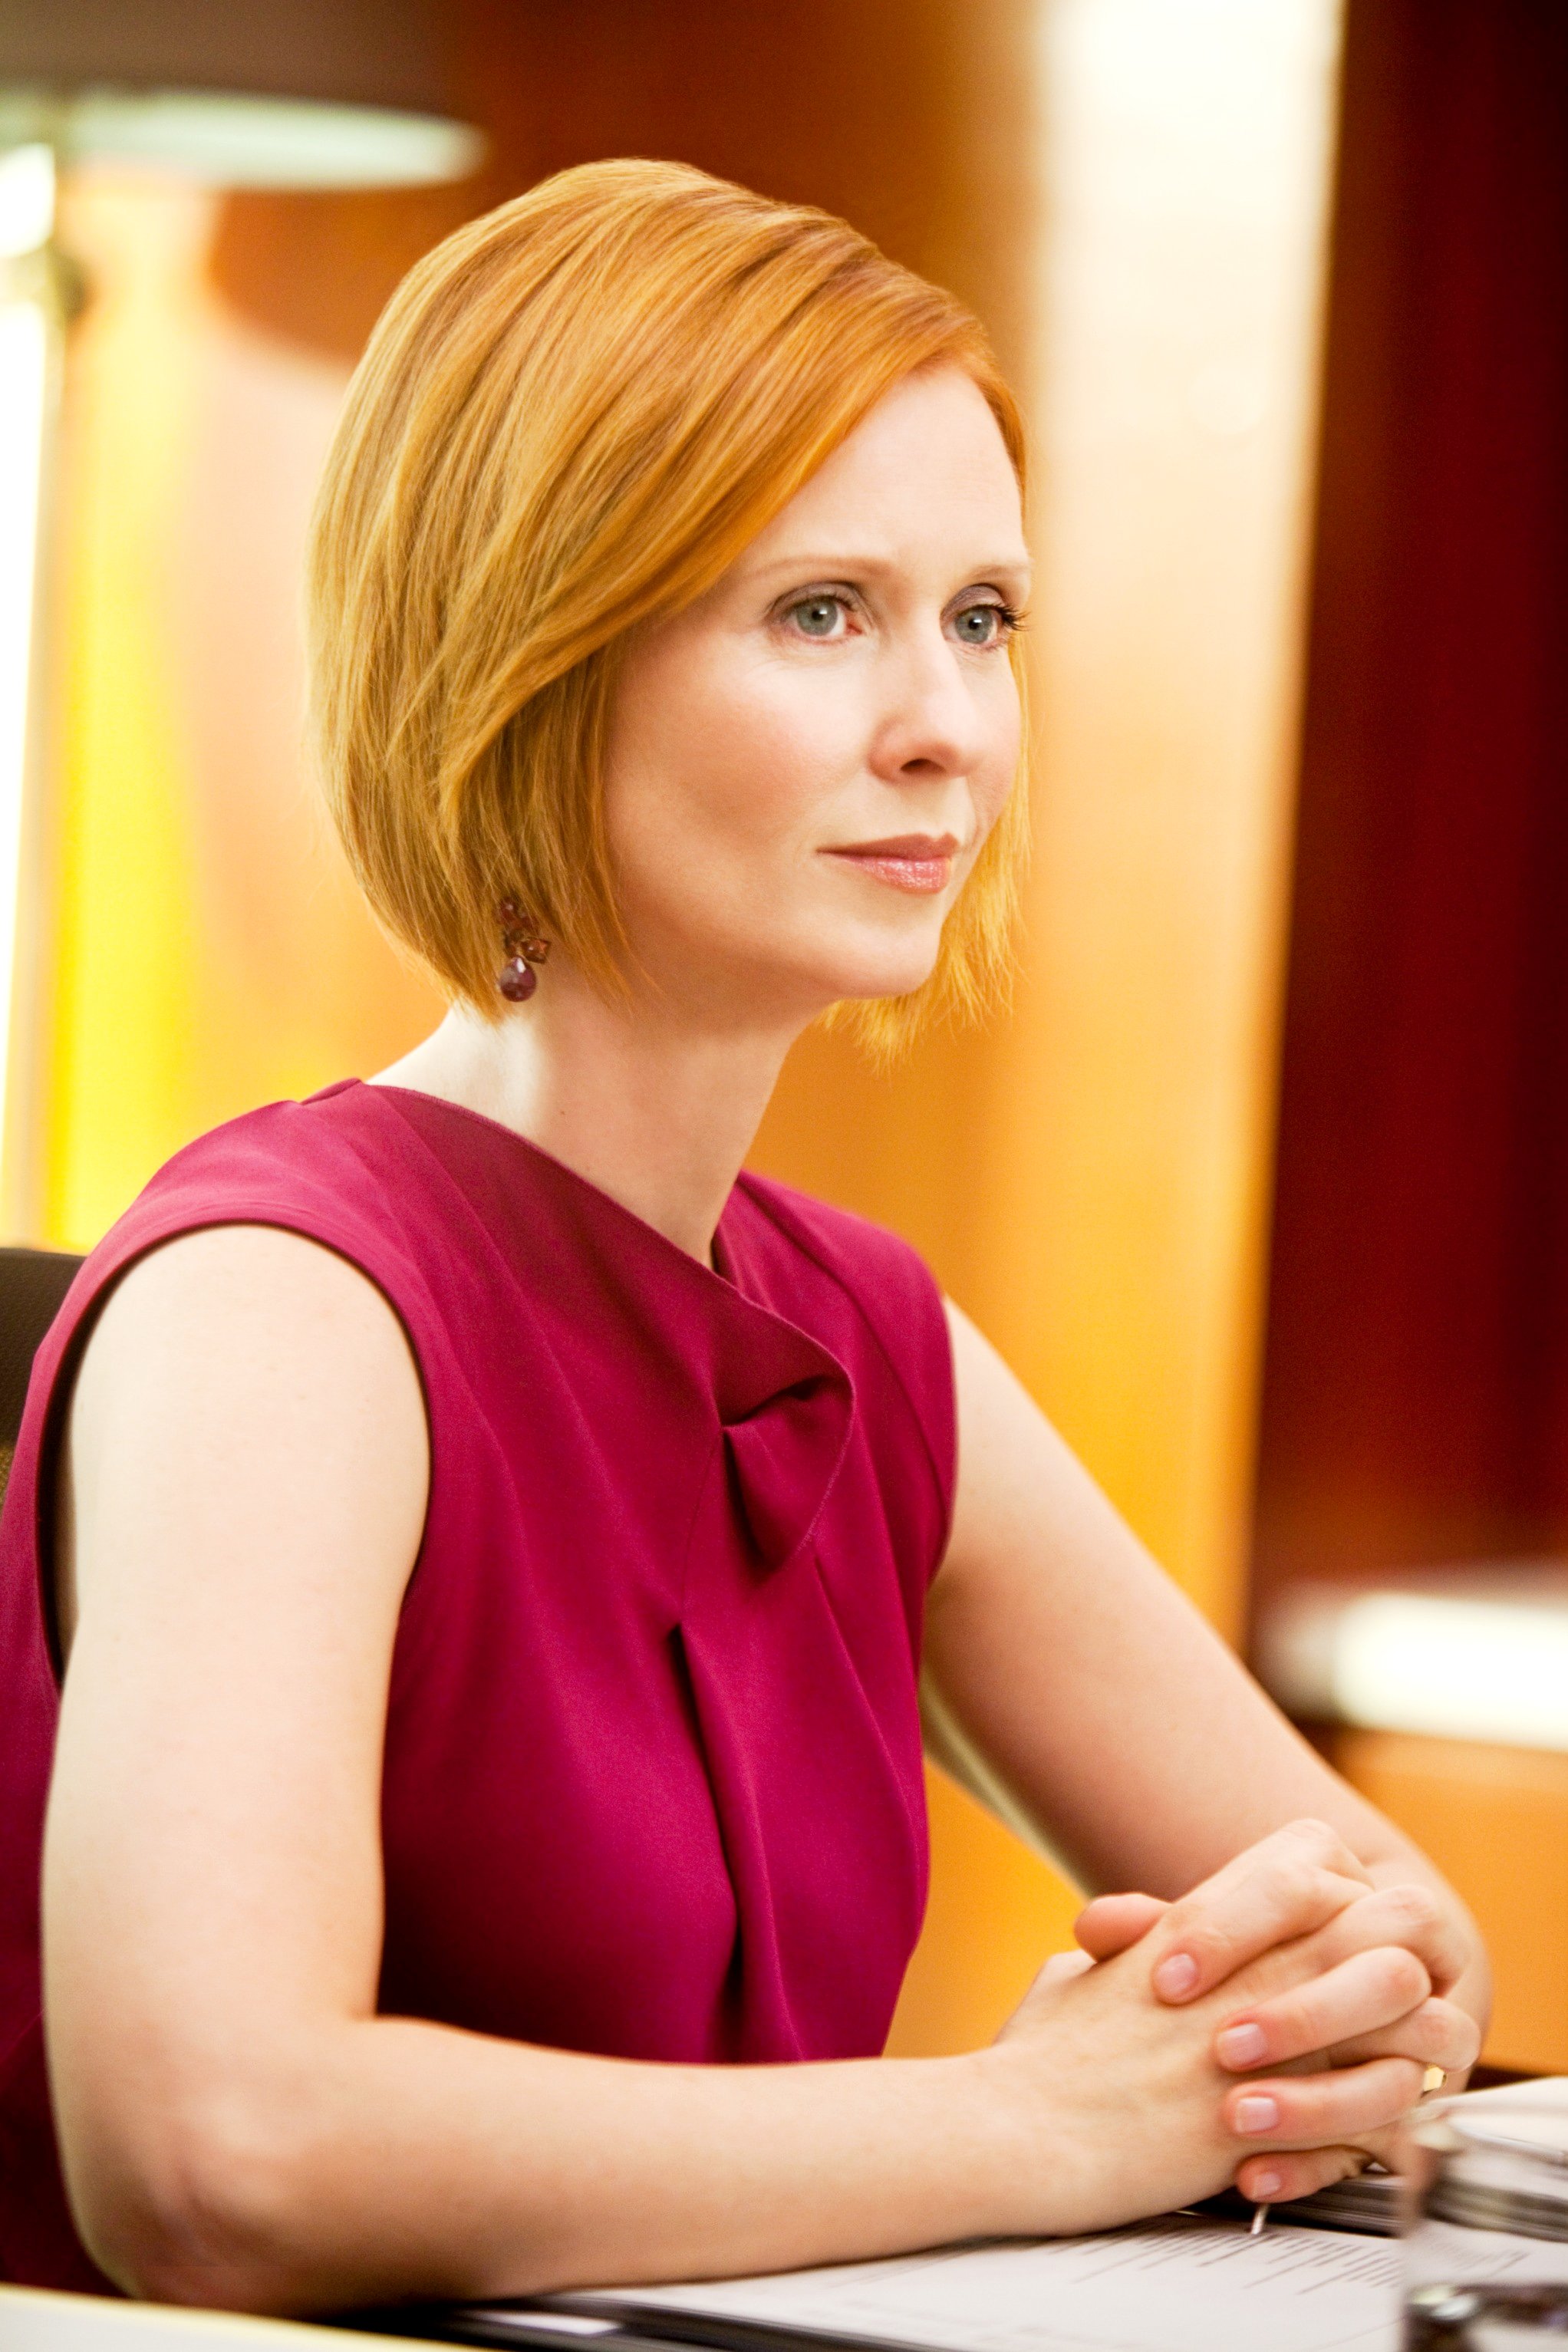 Sex And The City Our Feature On The Show Starring Cynthia Nixon My